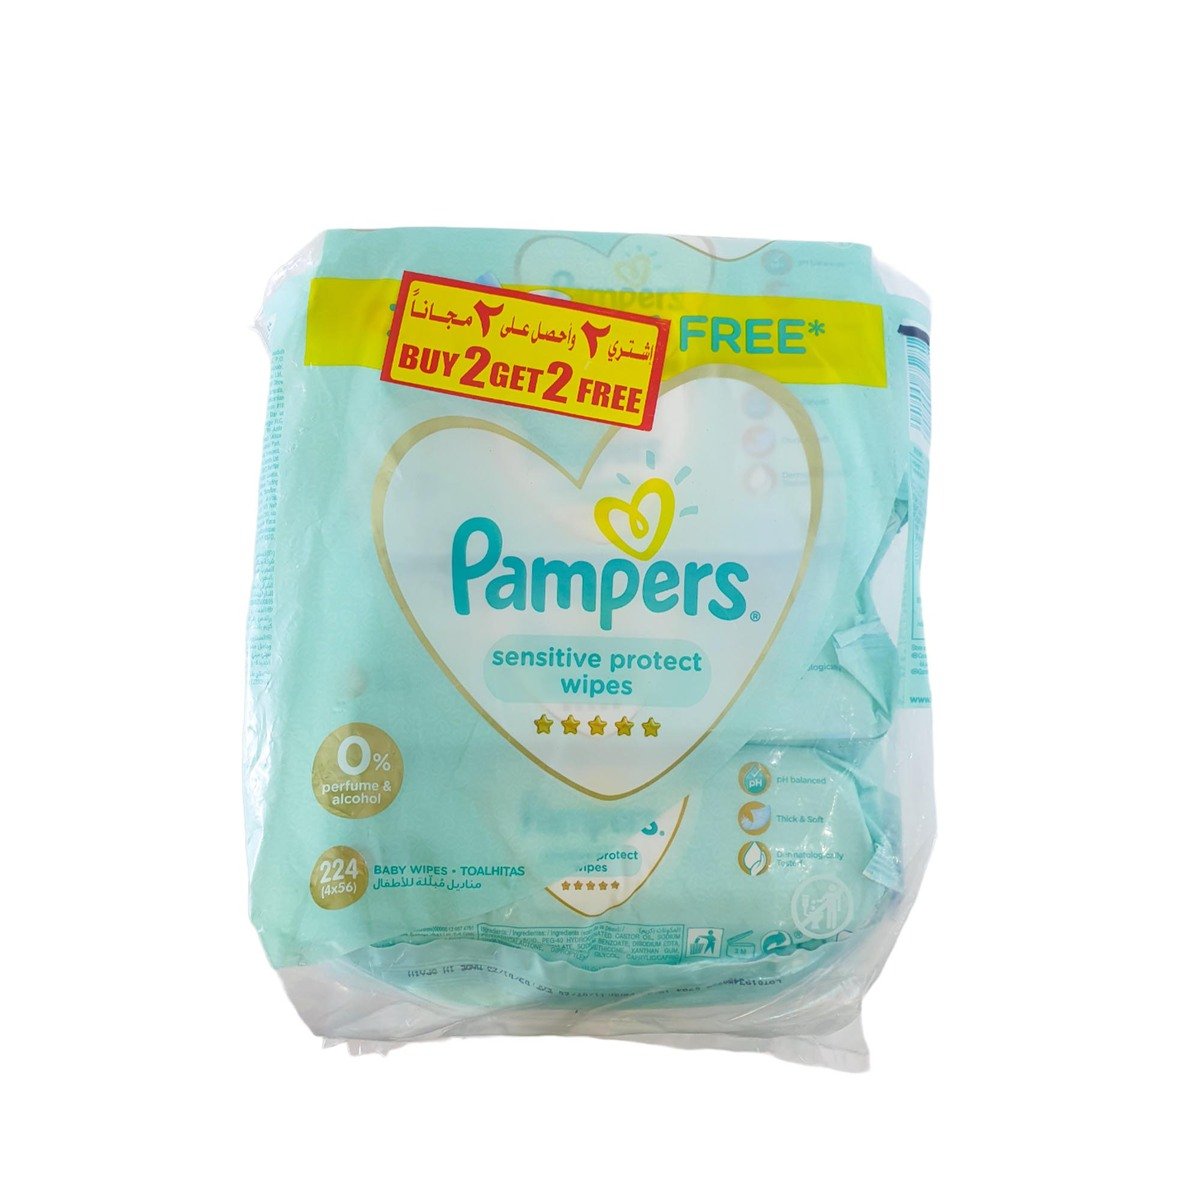 Pampers Baby Wipes Sensitive Value Pack 4 x 56 pcs